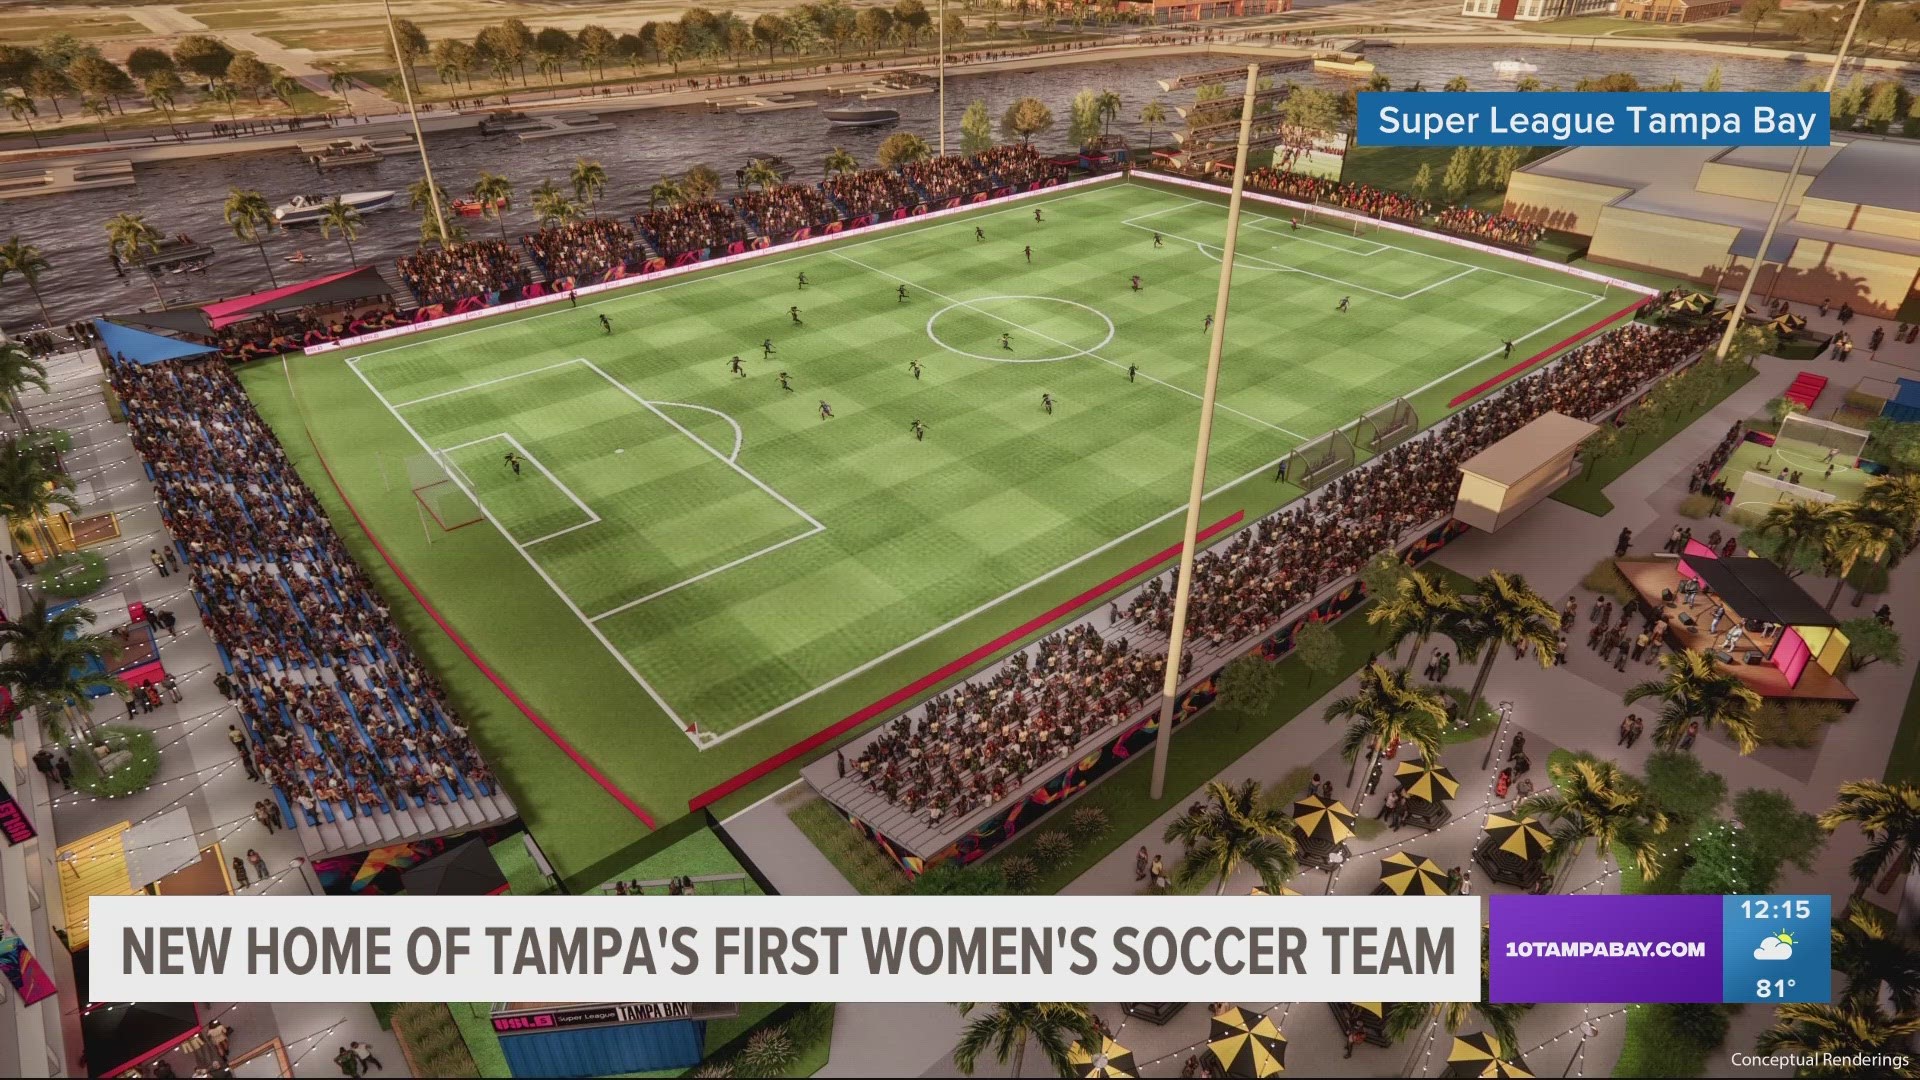 The new plans for the soccer stadium were revealed. The first home game is set for August 2024.